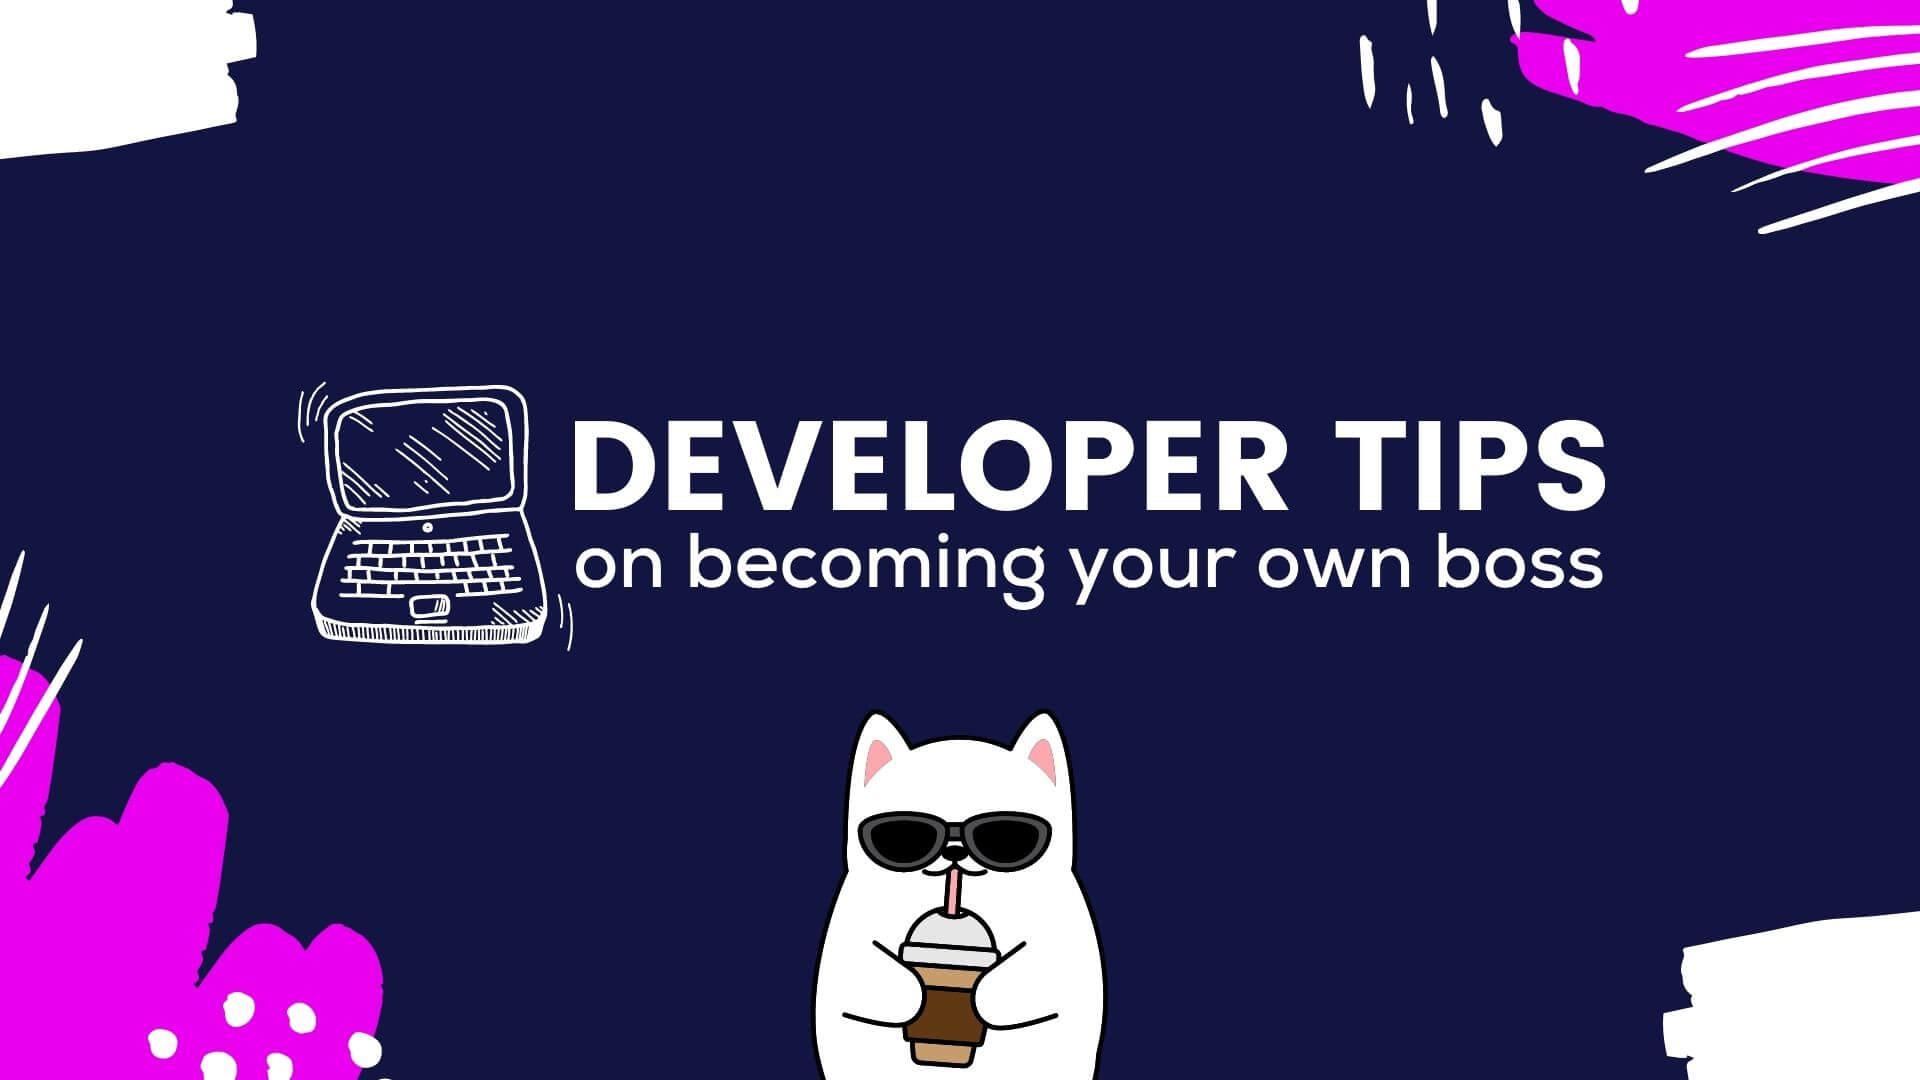 Developer Tips on Becoming Your Own Boss